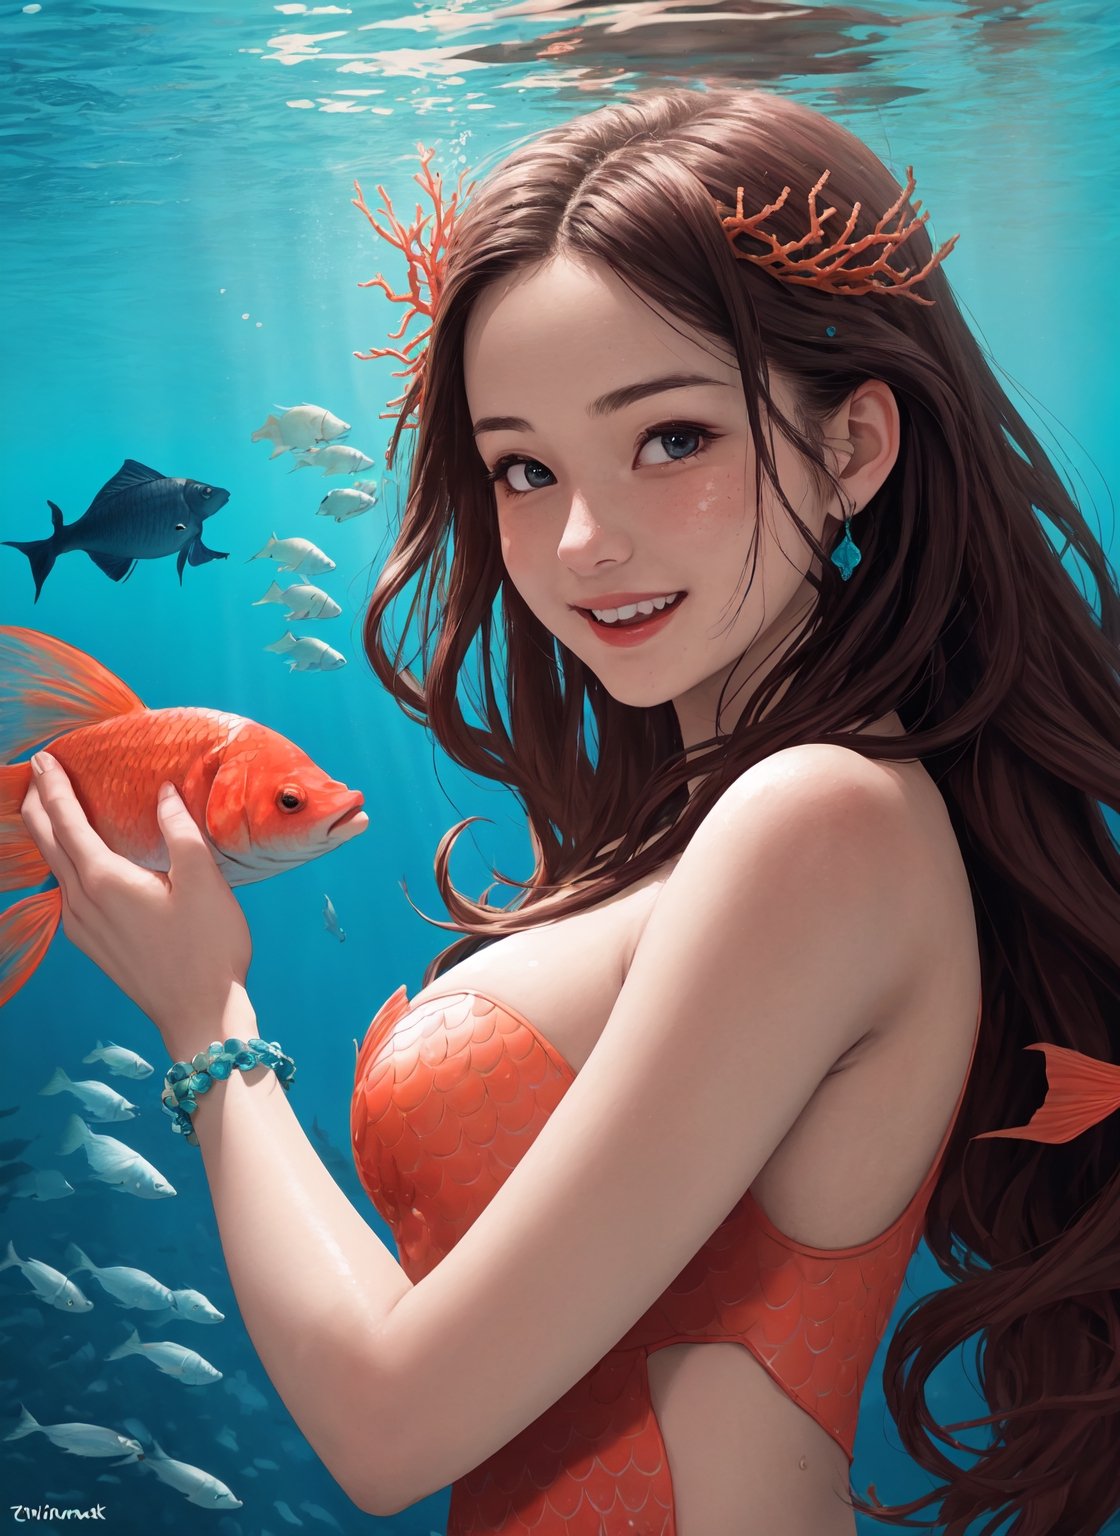  2girl mermaid, masterpiece , dancing, underwater graceful, viridian gradient fish scale body, perfect, realistic, symmetrical, beautiful smiling face, insanely detailed facial expression, hyper-realistic hands waving to viewers.background fish and coral shipwreck